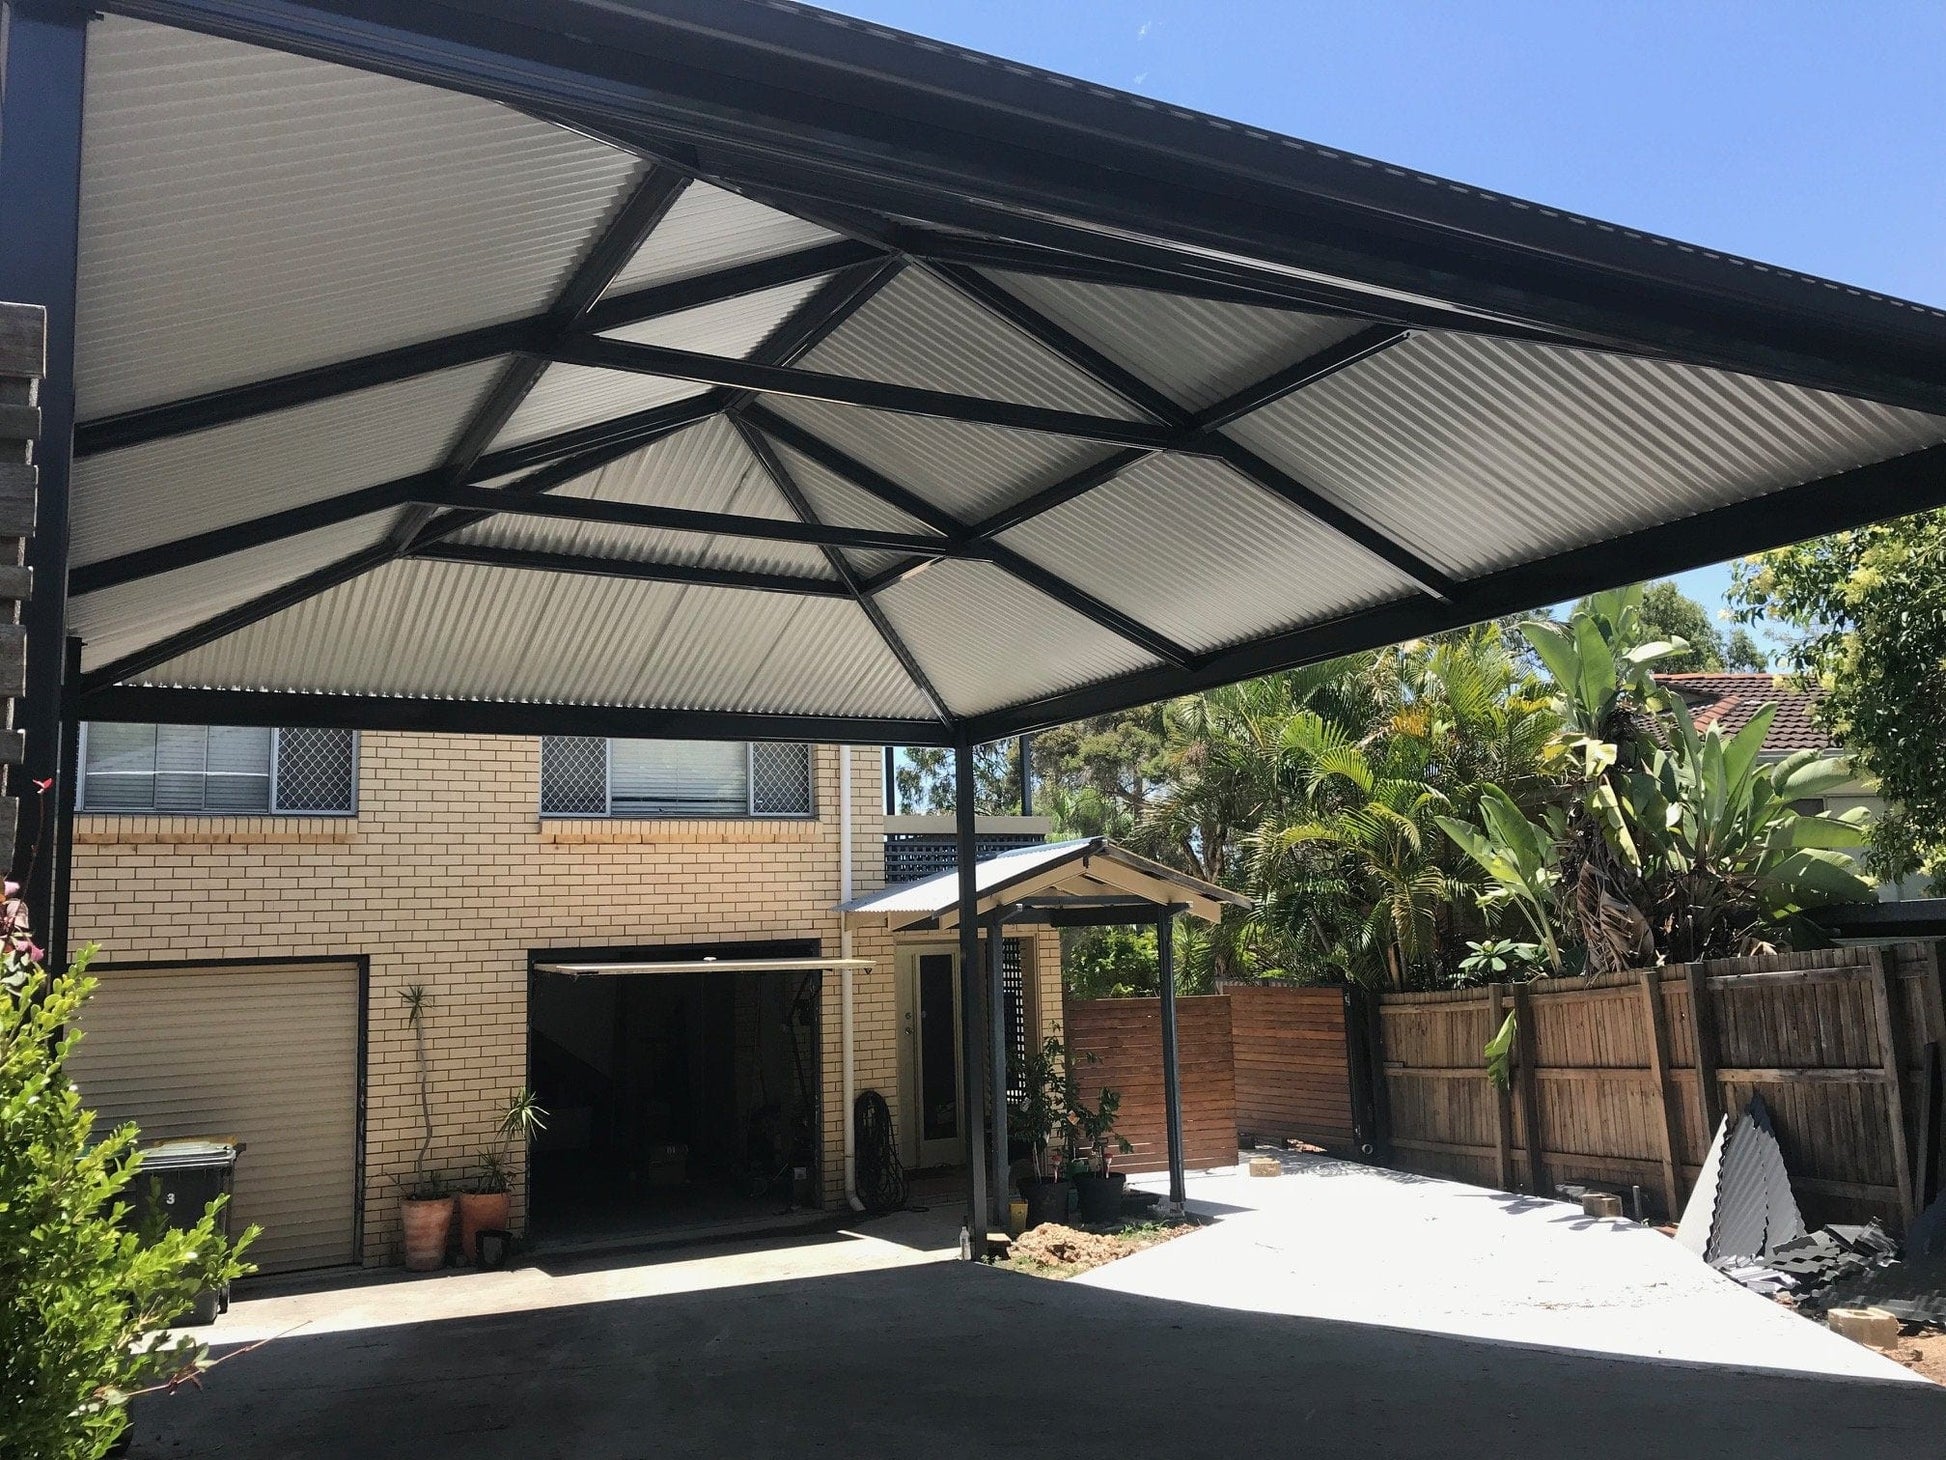 Insulated Gable Patio - 8m x 4m - Supply & Install QHI National